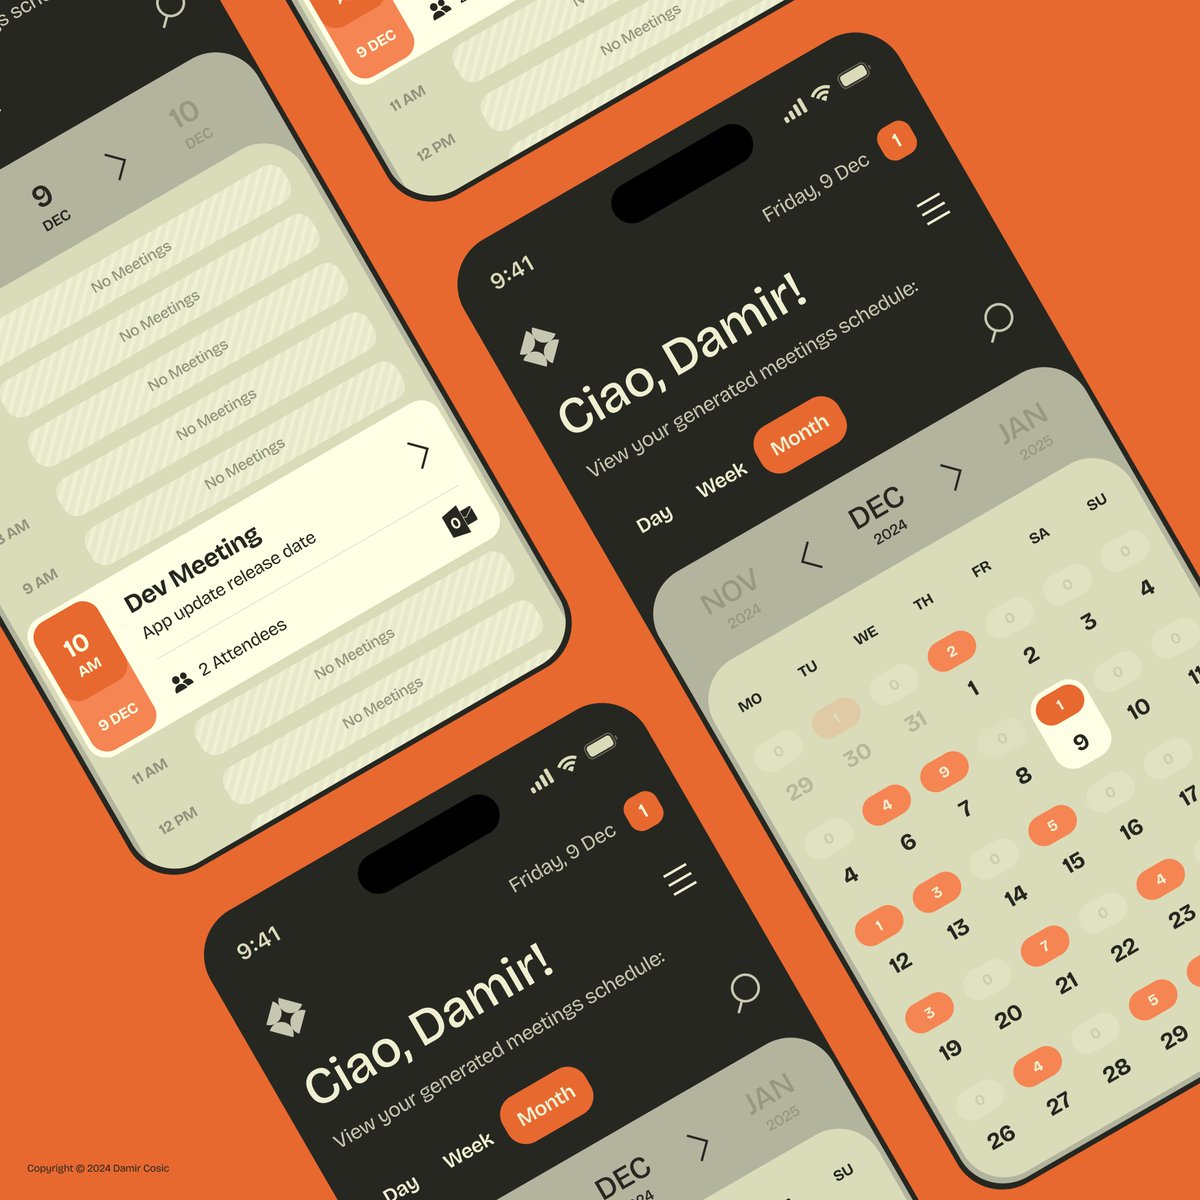 Hey, Xers 👋

Here's more Meetgen designs!

Meetgen is a mobile app that generates meetings schedules in your calendar from the video or audio call.

#ai #aiapplications #appdesign #mobileappdesign #mobiledesign #uidesign #uxdesign #uiuxdesign #mobileapp #productdesign #design